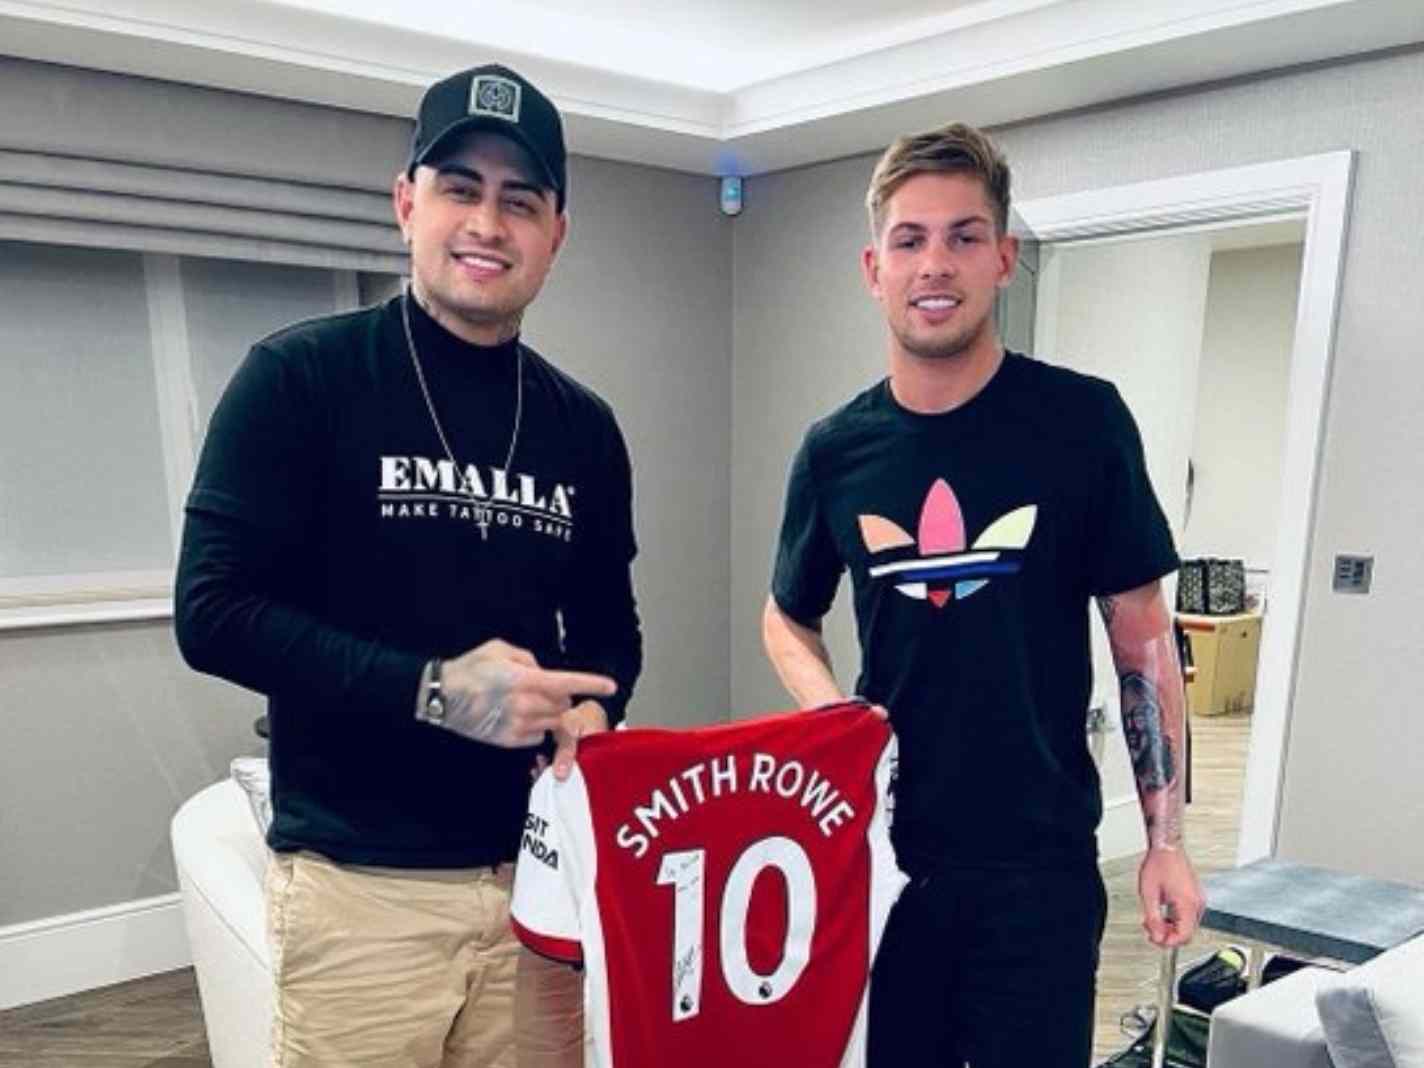 In this image - Emile Smith Rowe on the right, along with his tattoo artist on the left. Both of them holding an Arsenal home kit.